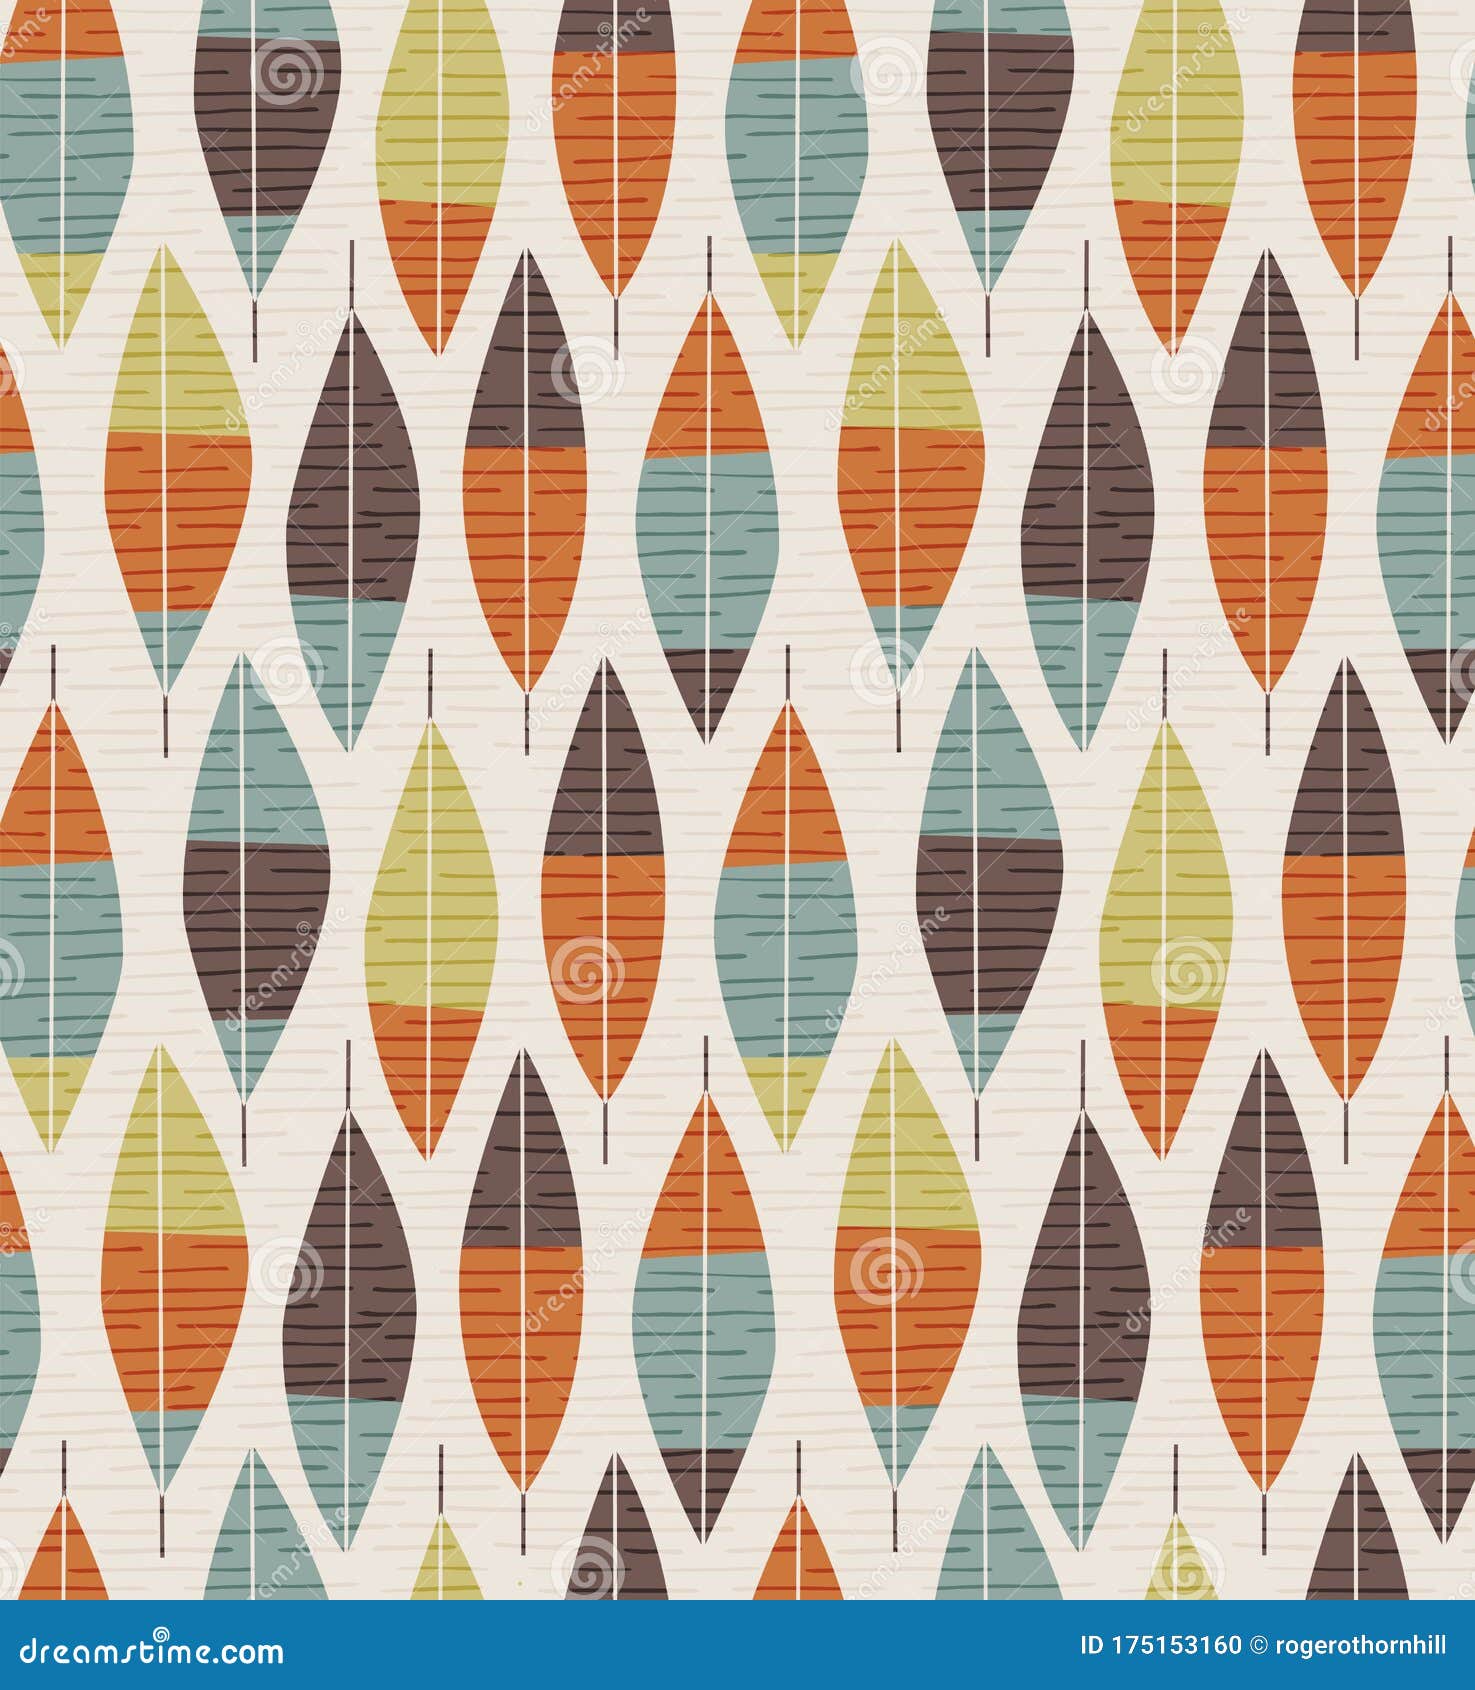 seamless mid century modern feather or leaf pattern.